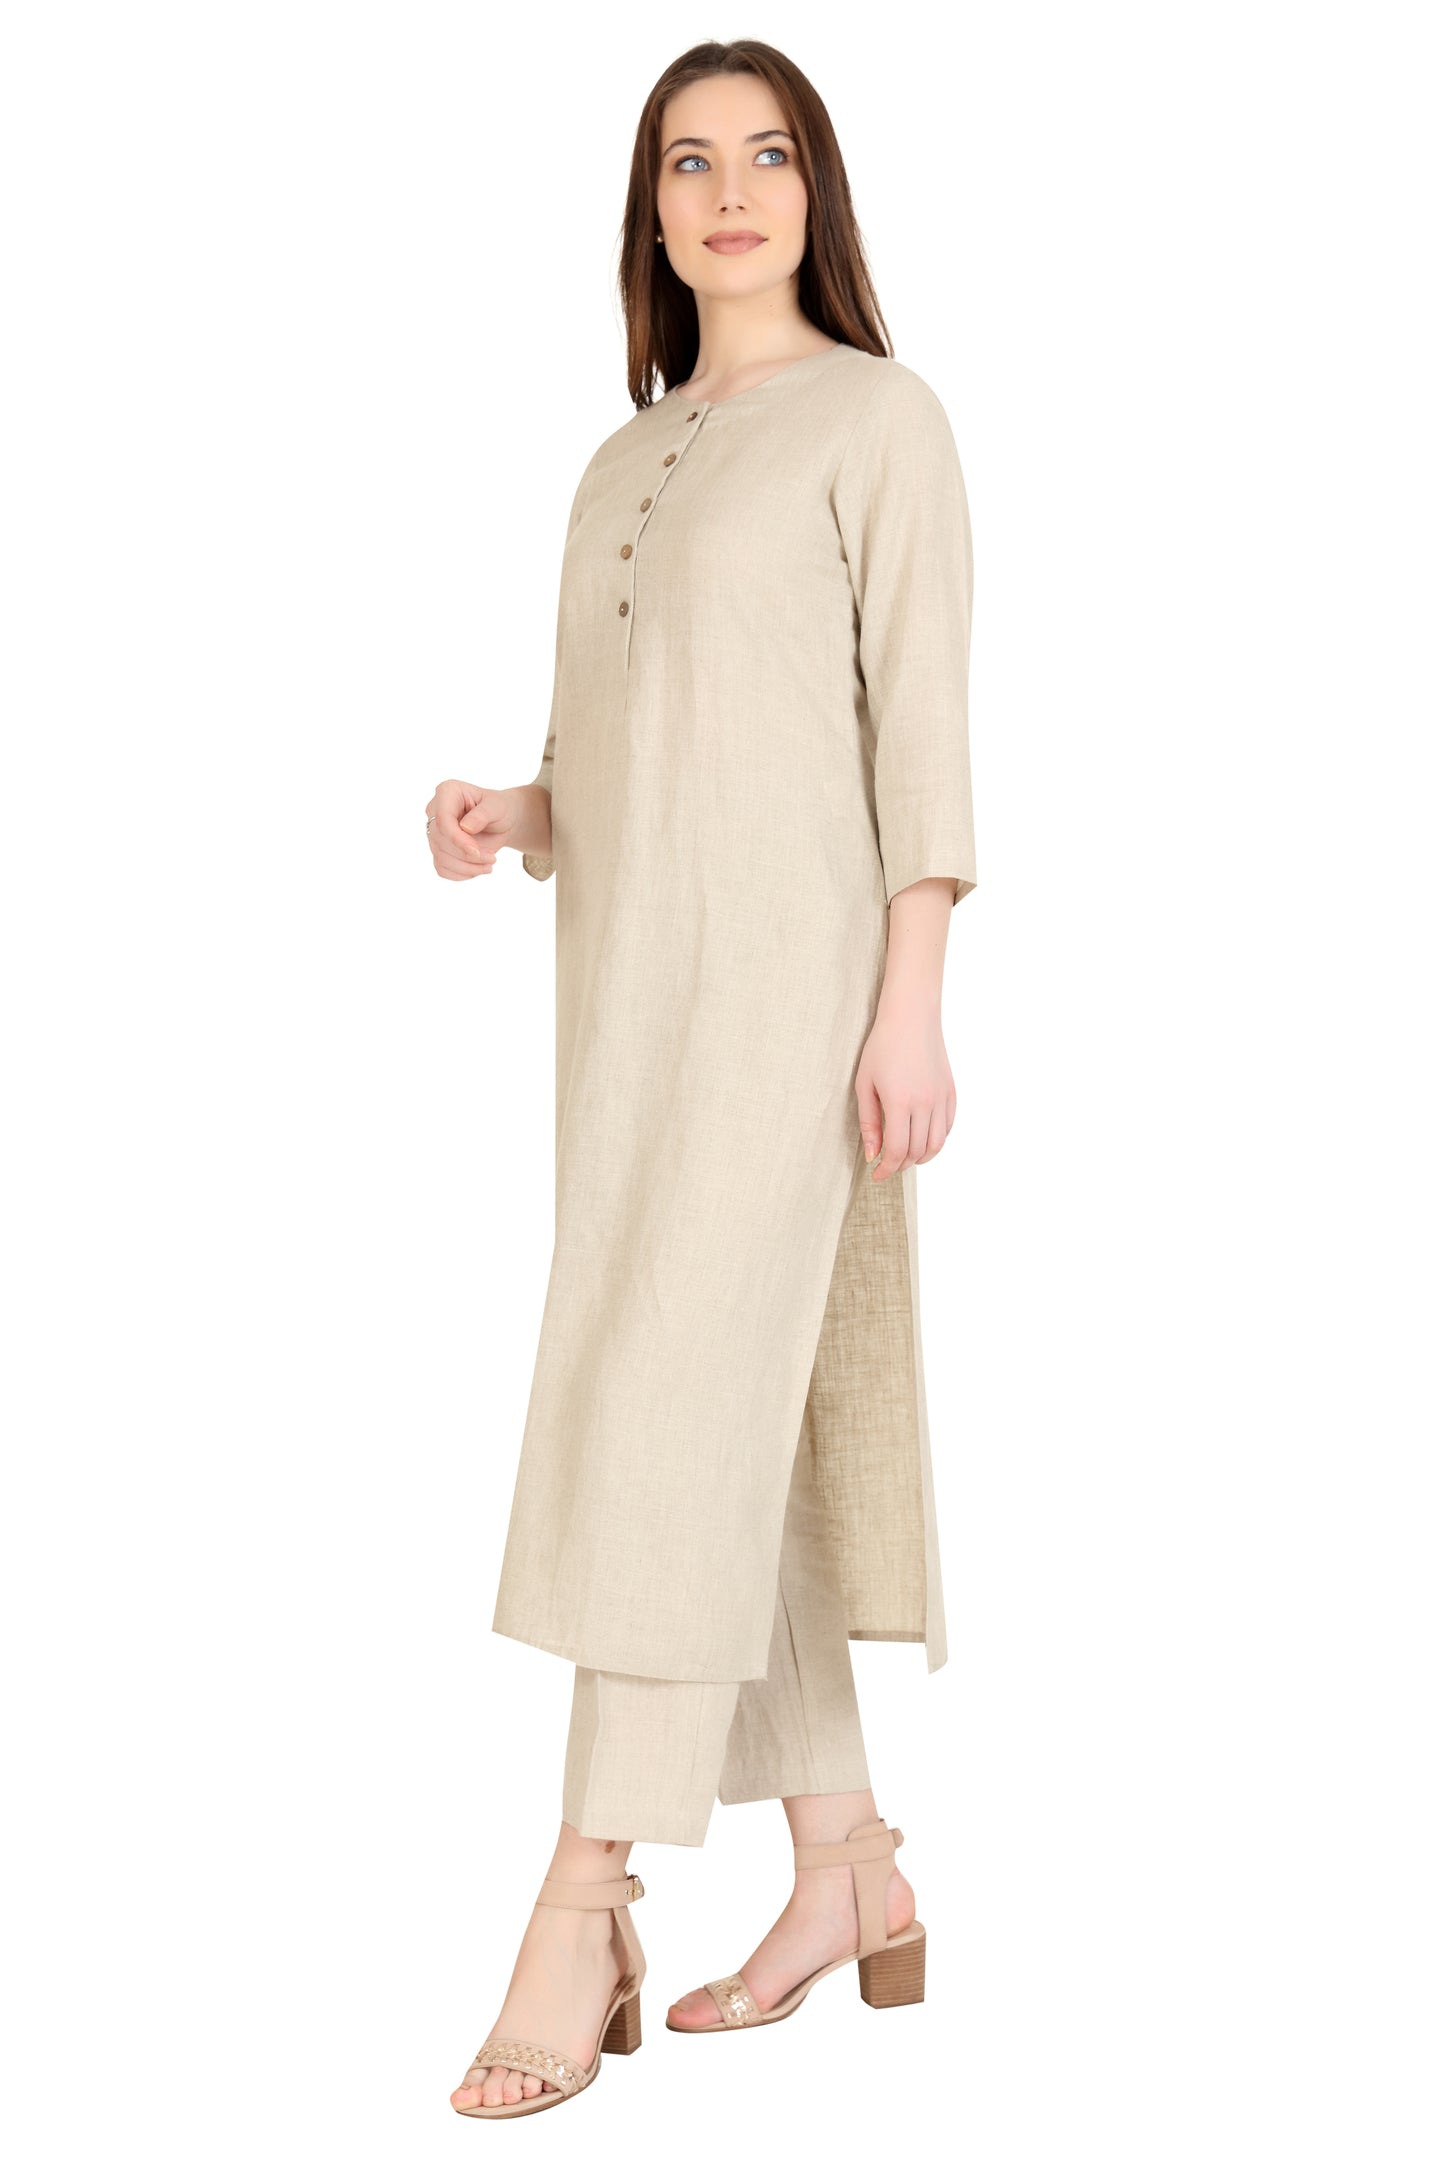 Linen and Linens - Beige Dipped Tunic - 2